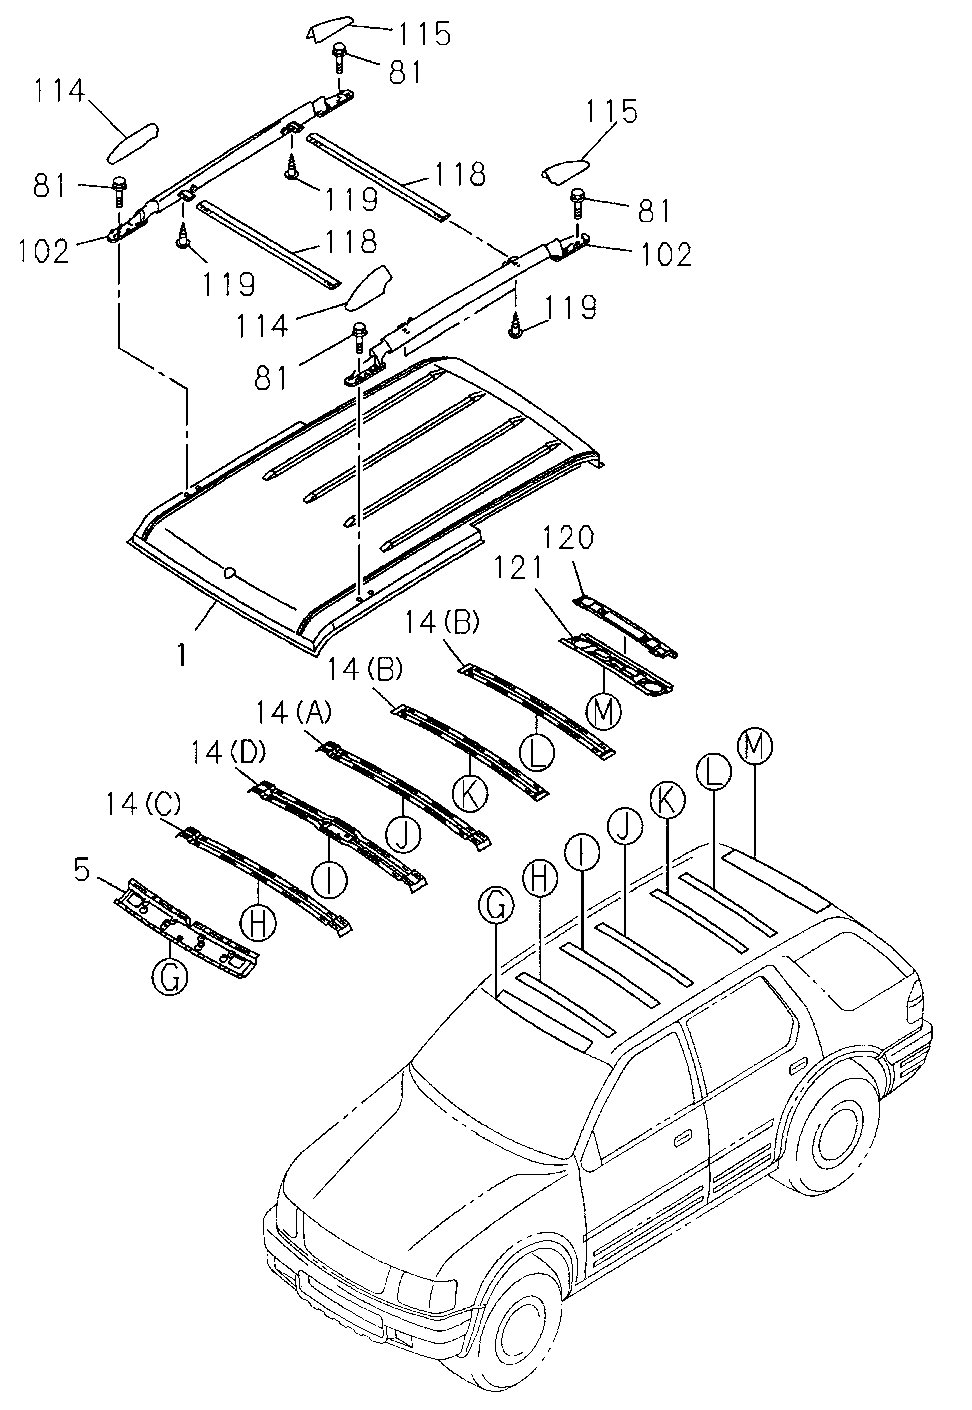 8-97124-190-2 - SUPPORT, ROOF